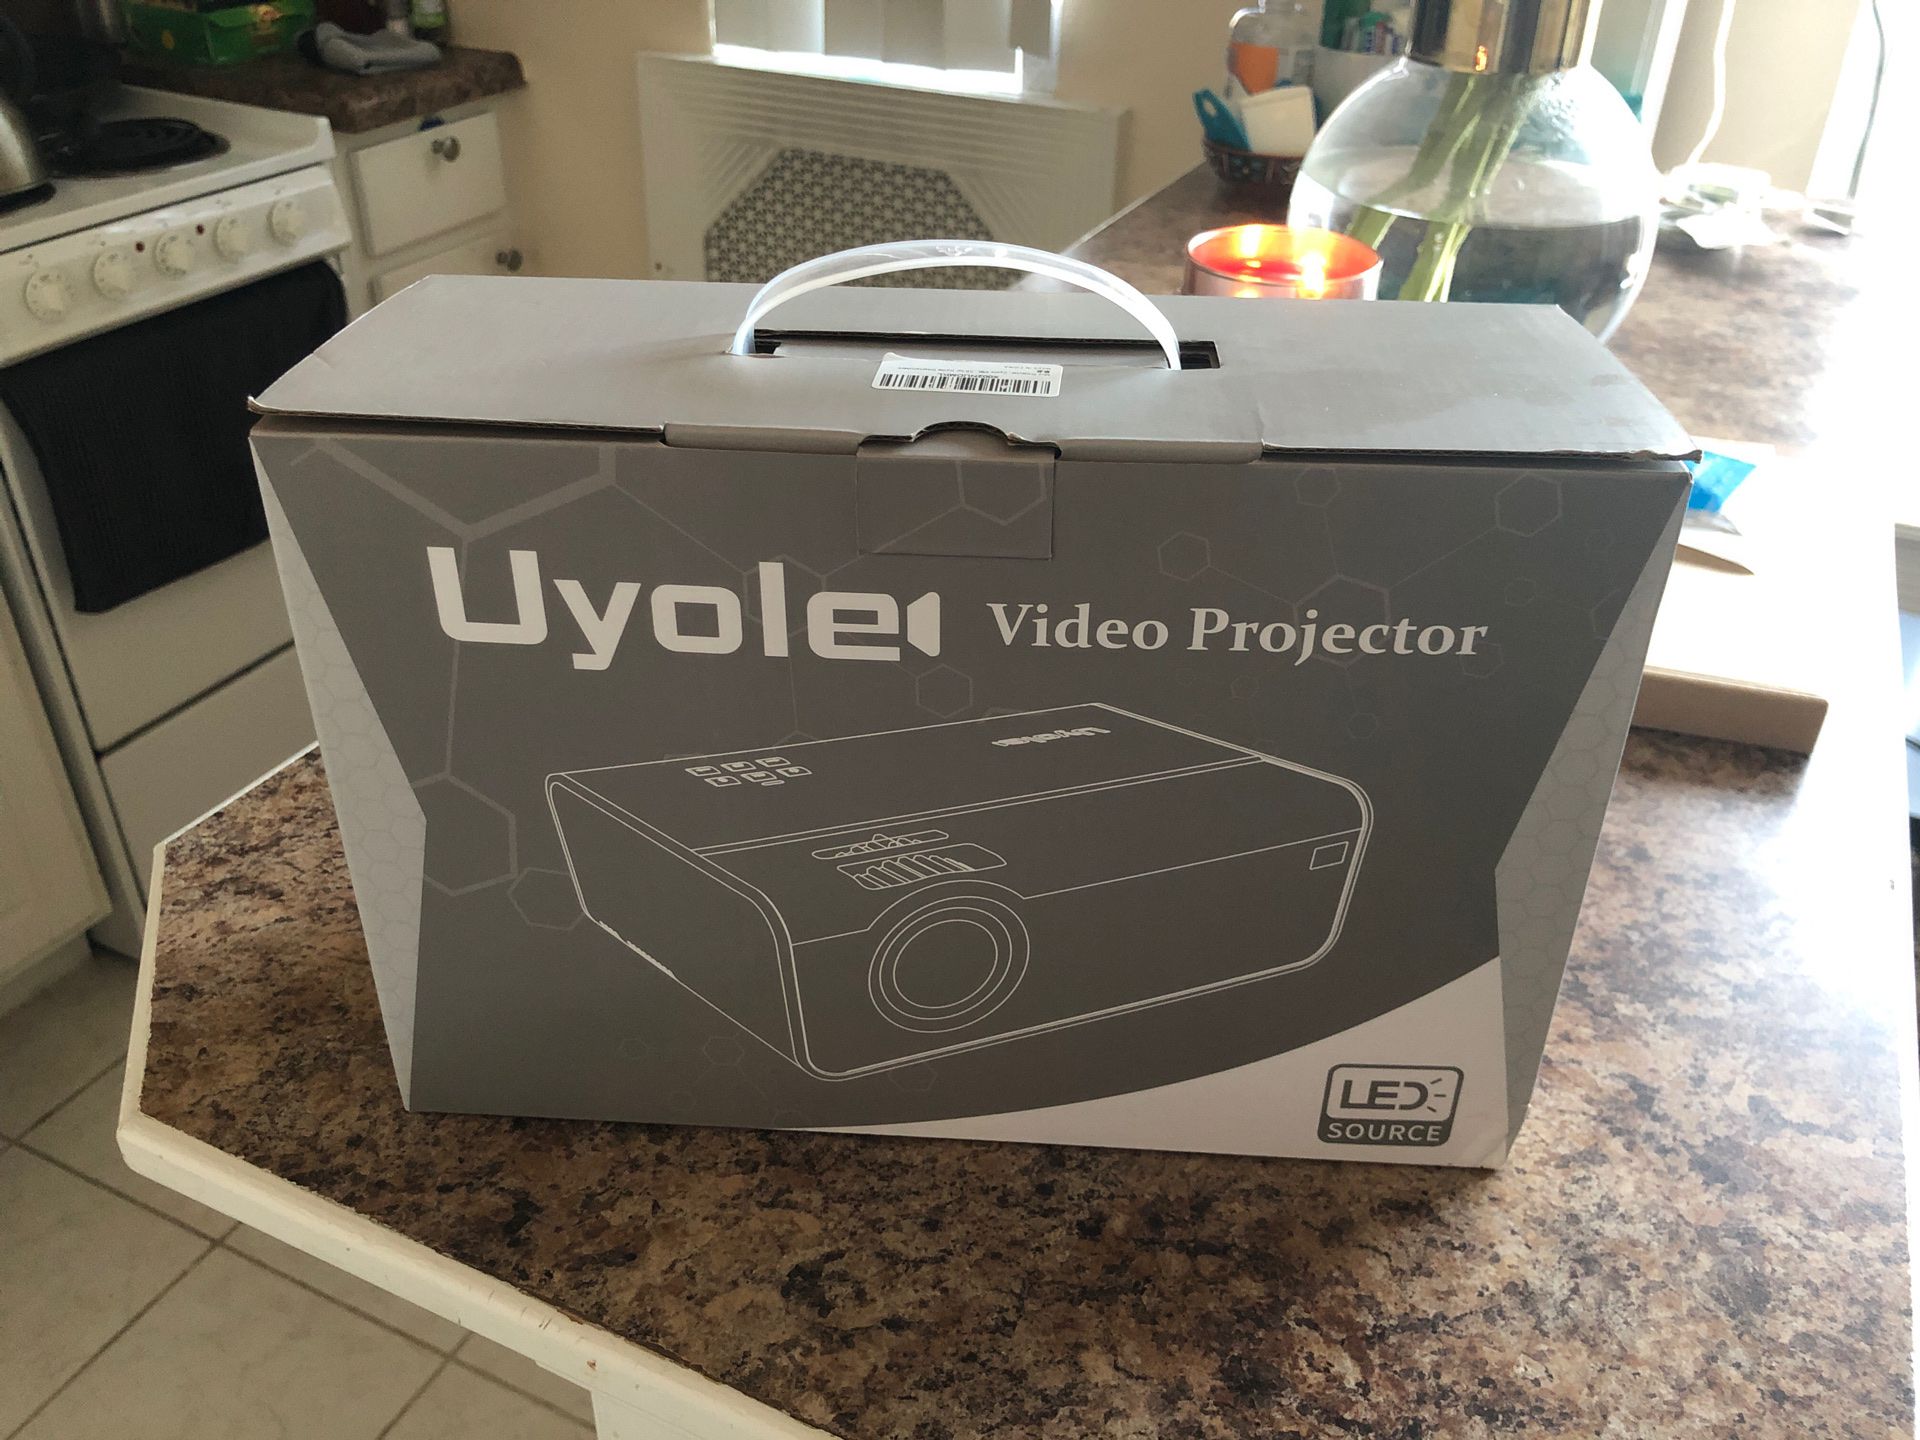 LED UYOLE Projector going for cheap!